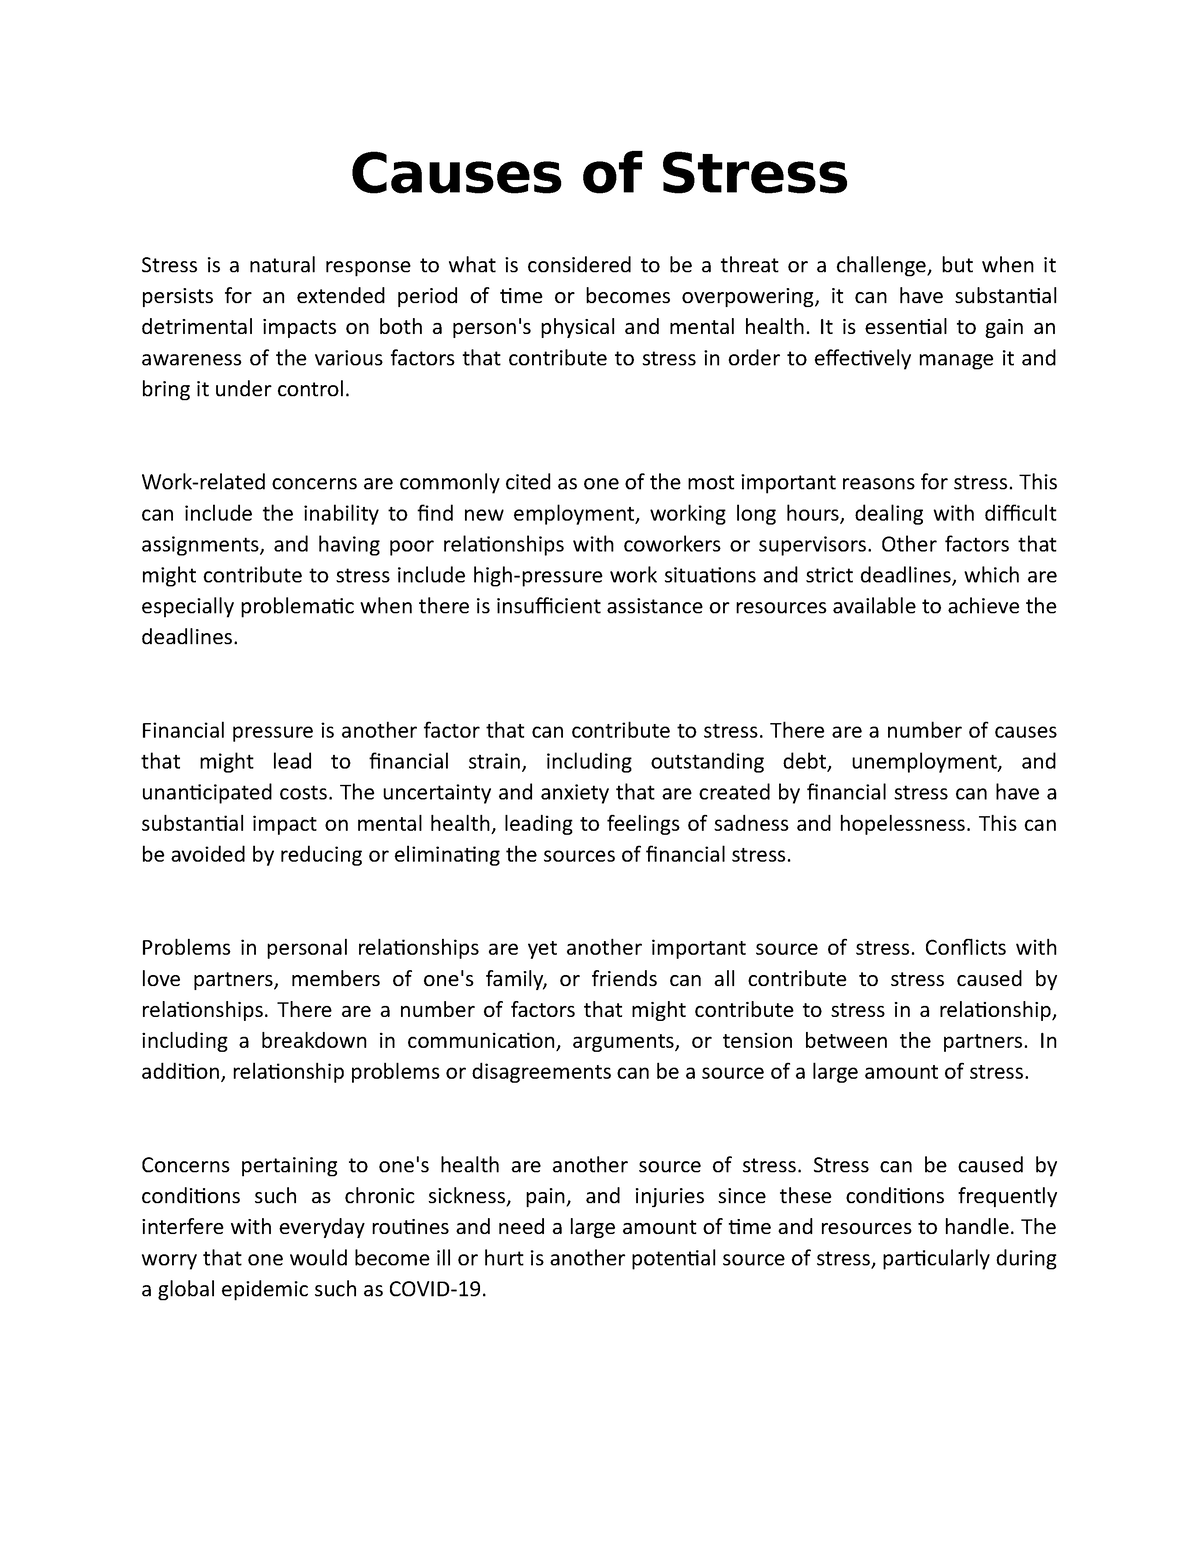 essay about causes and effects of stress